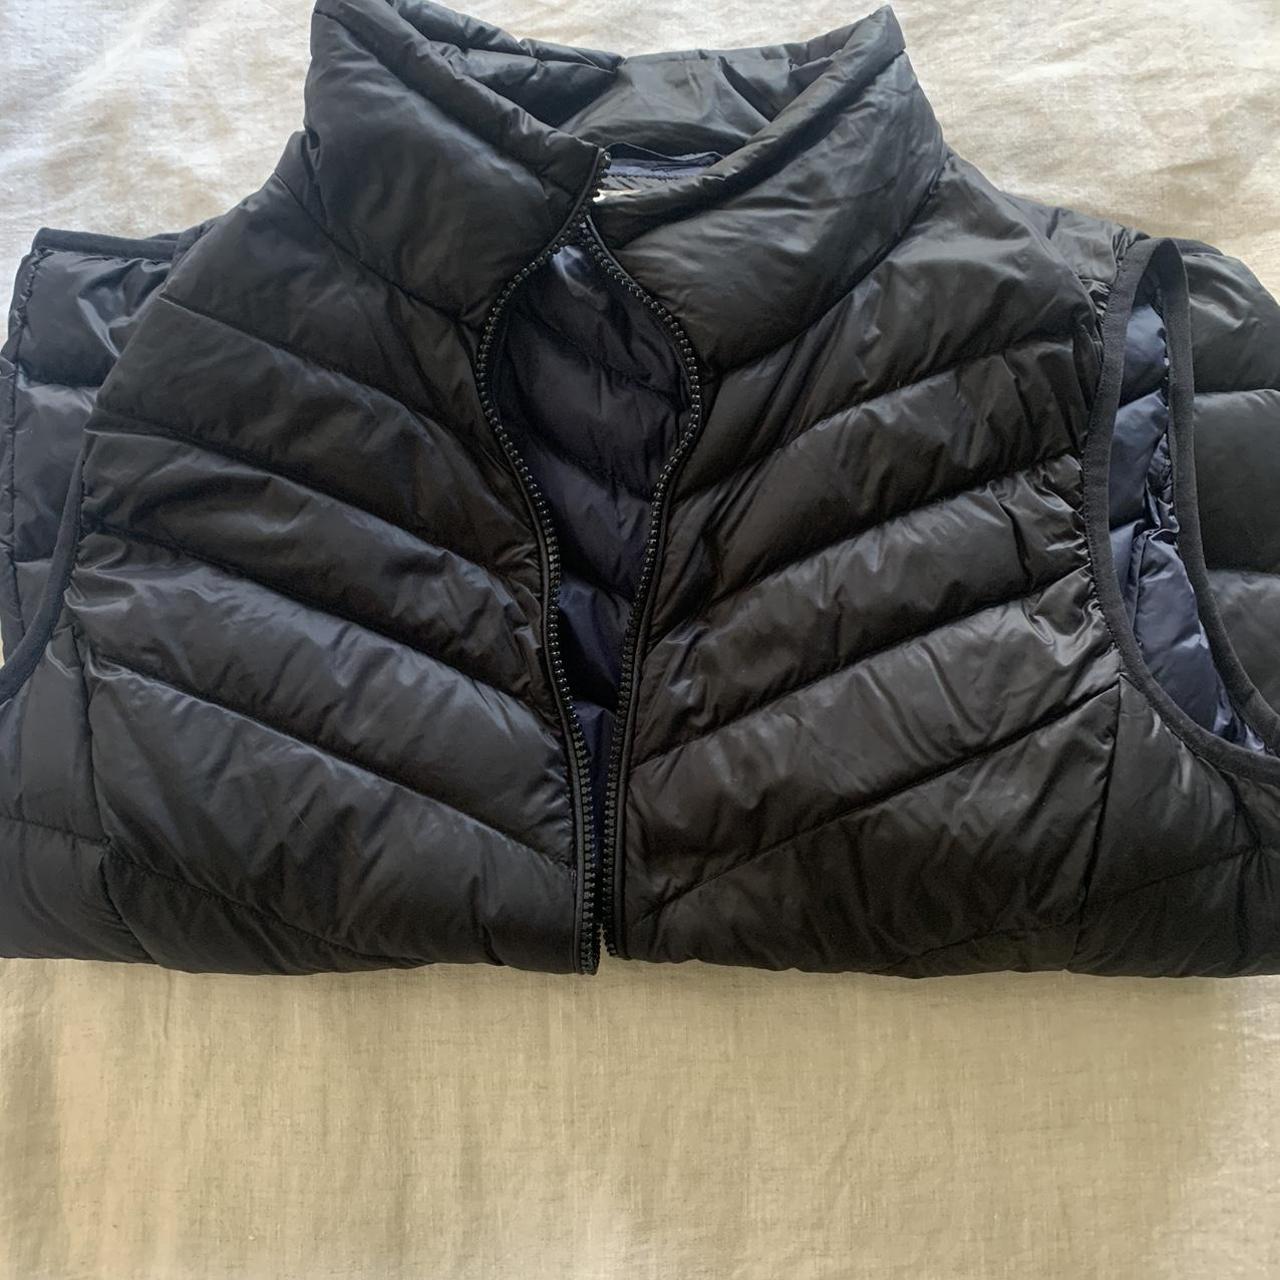 Cute puffer vest not sure what size but would fit a... - Depop